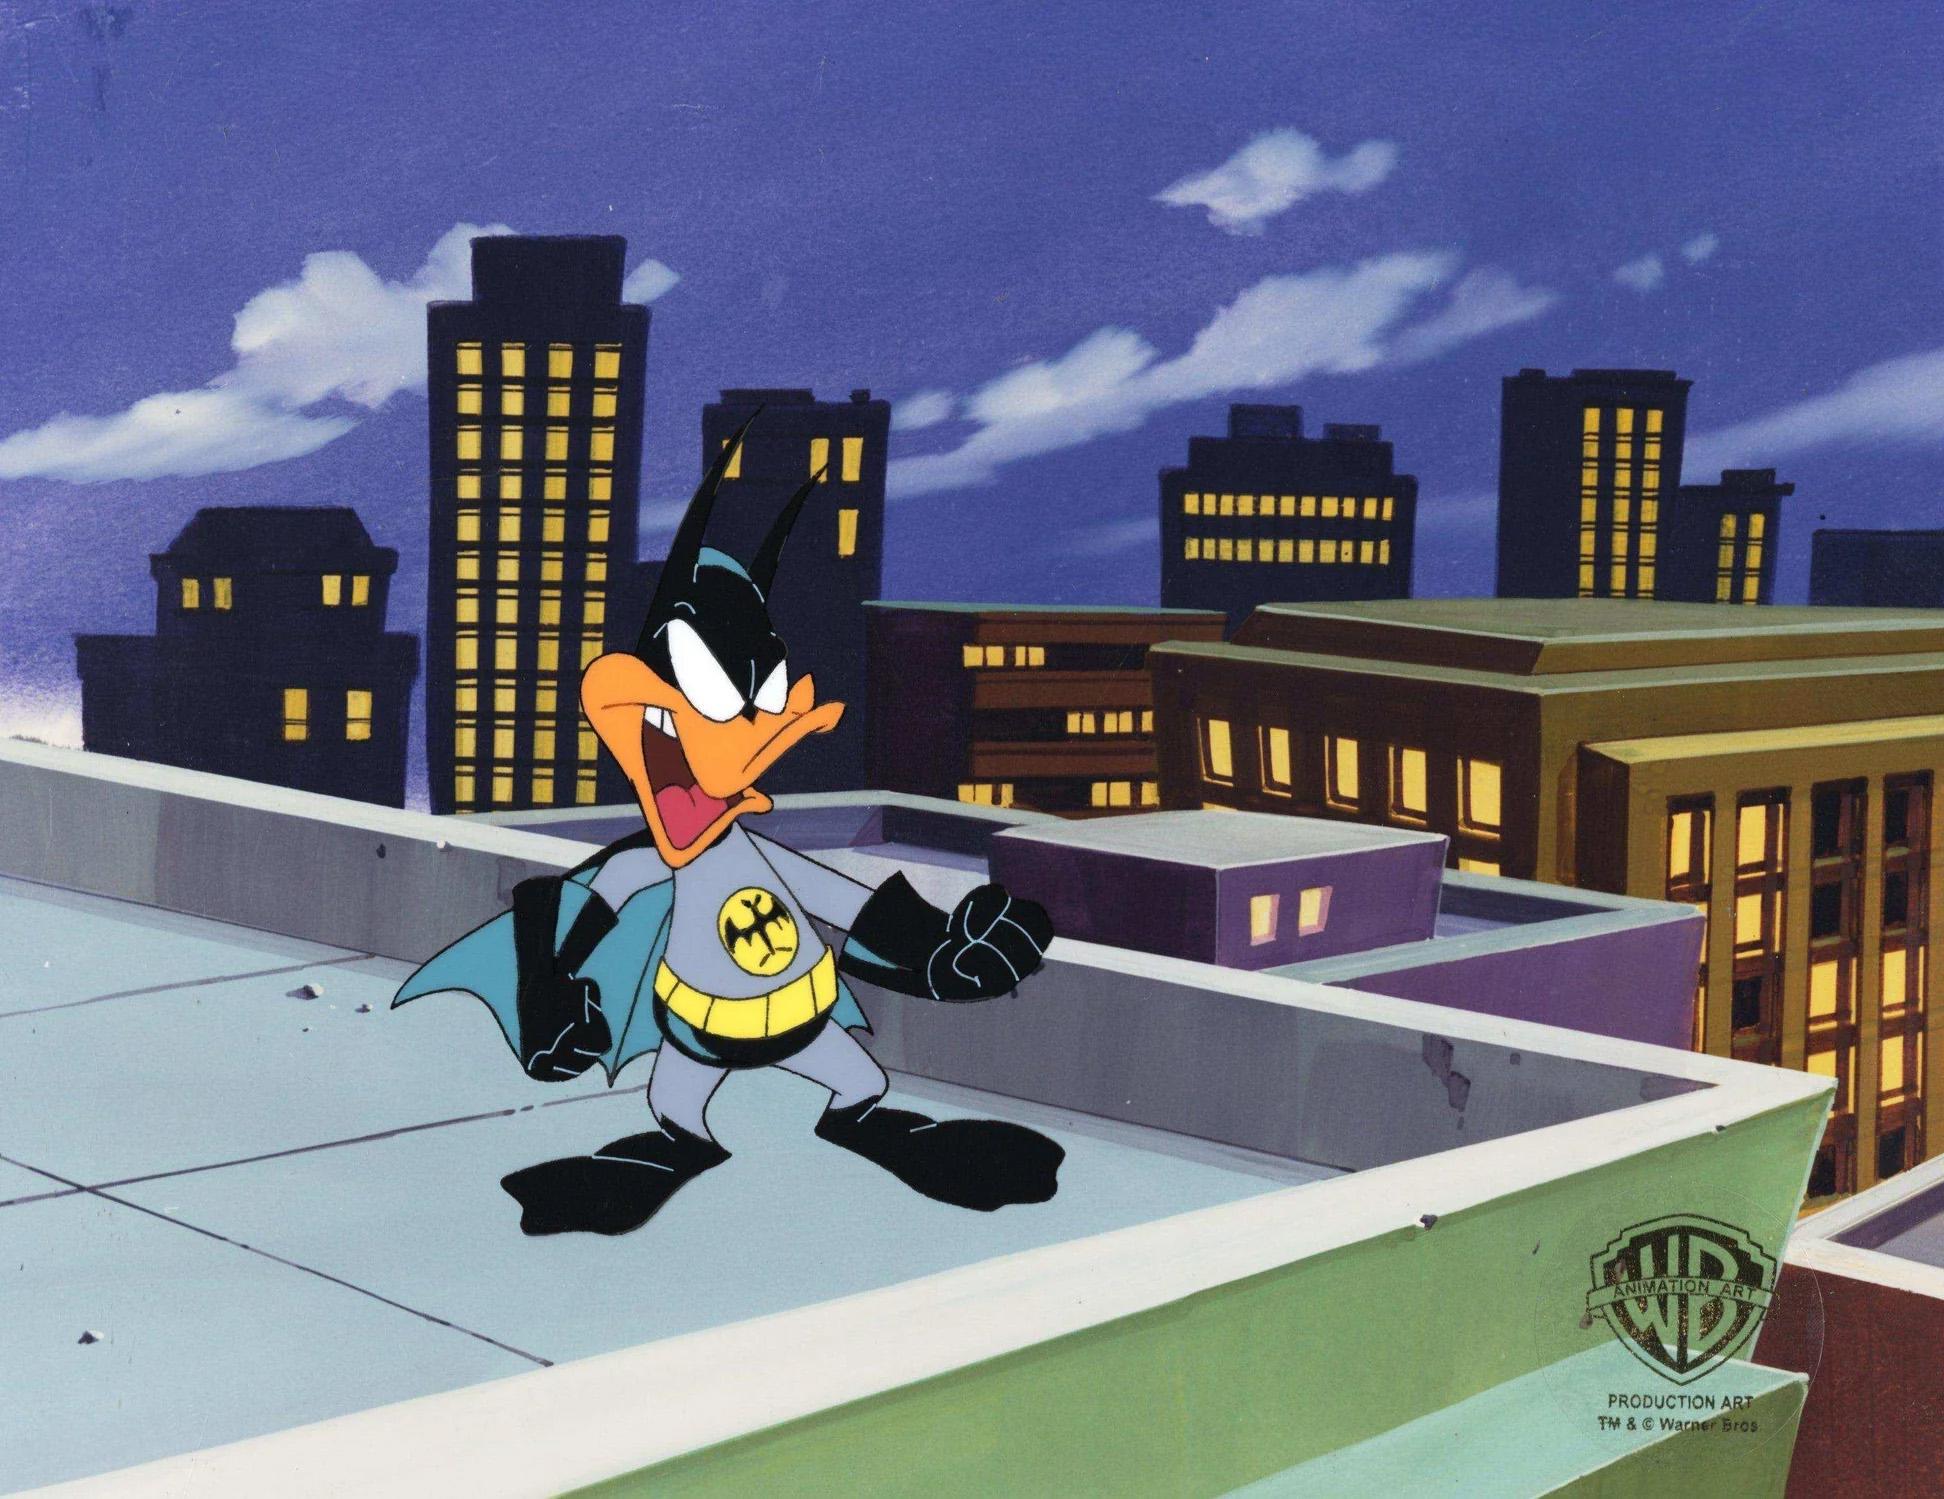 Tiny Toons Original Production Cel With Matching Drawing: Batduck - Art by Warner Bros. Studio Artists